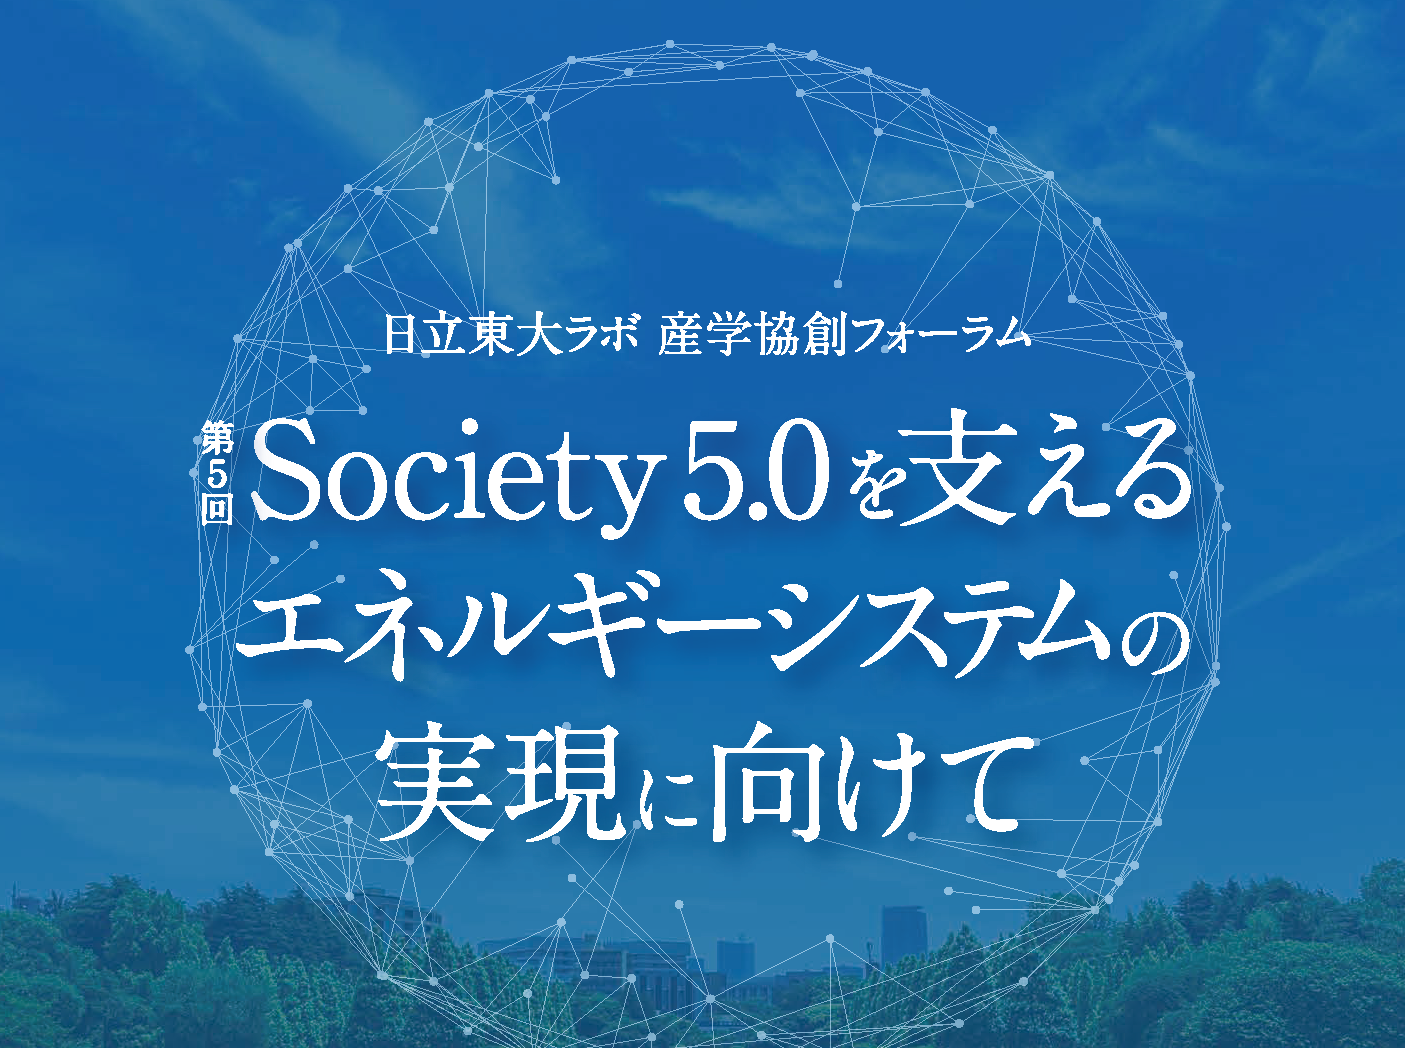 5th H-UTokyo Lab. Industry-Academia Collaboration Forum “Toward Realizing Energy Systems to Support Society 5.0” was held.